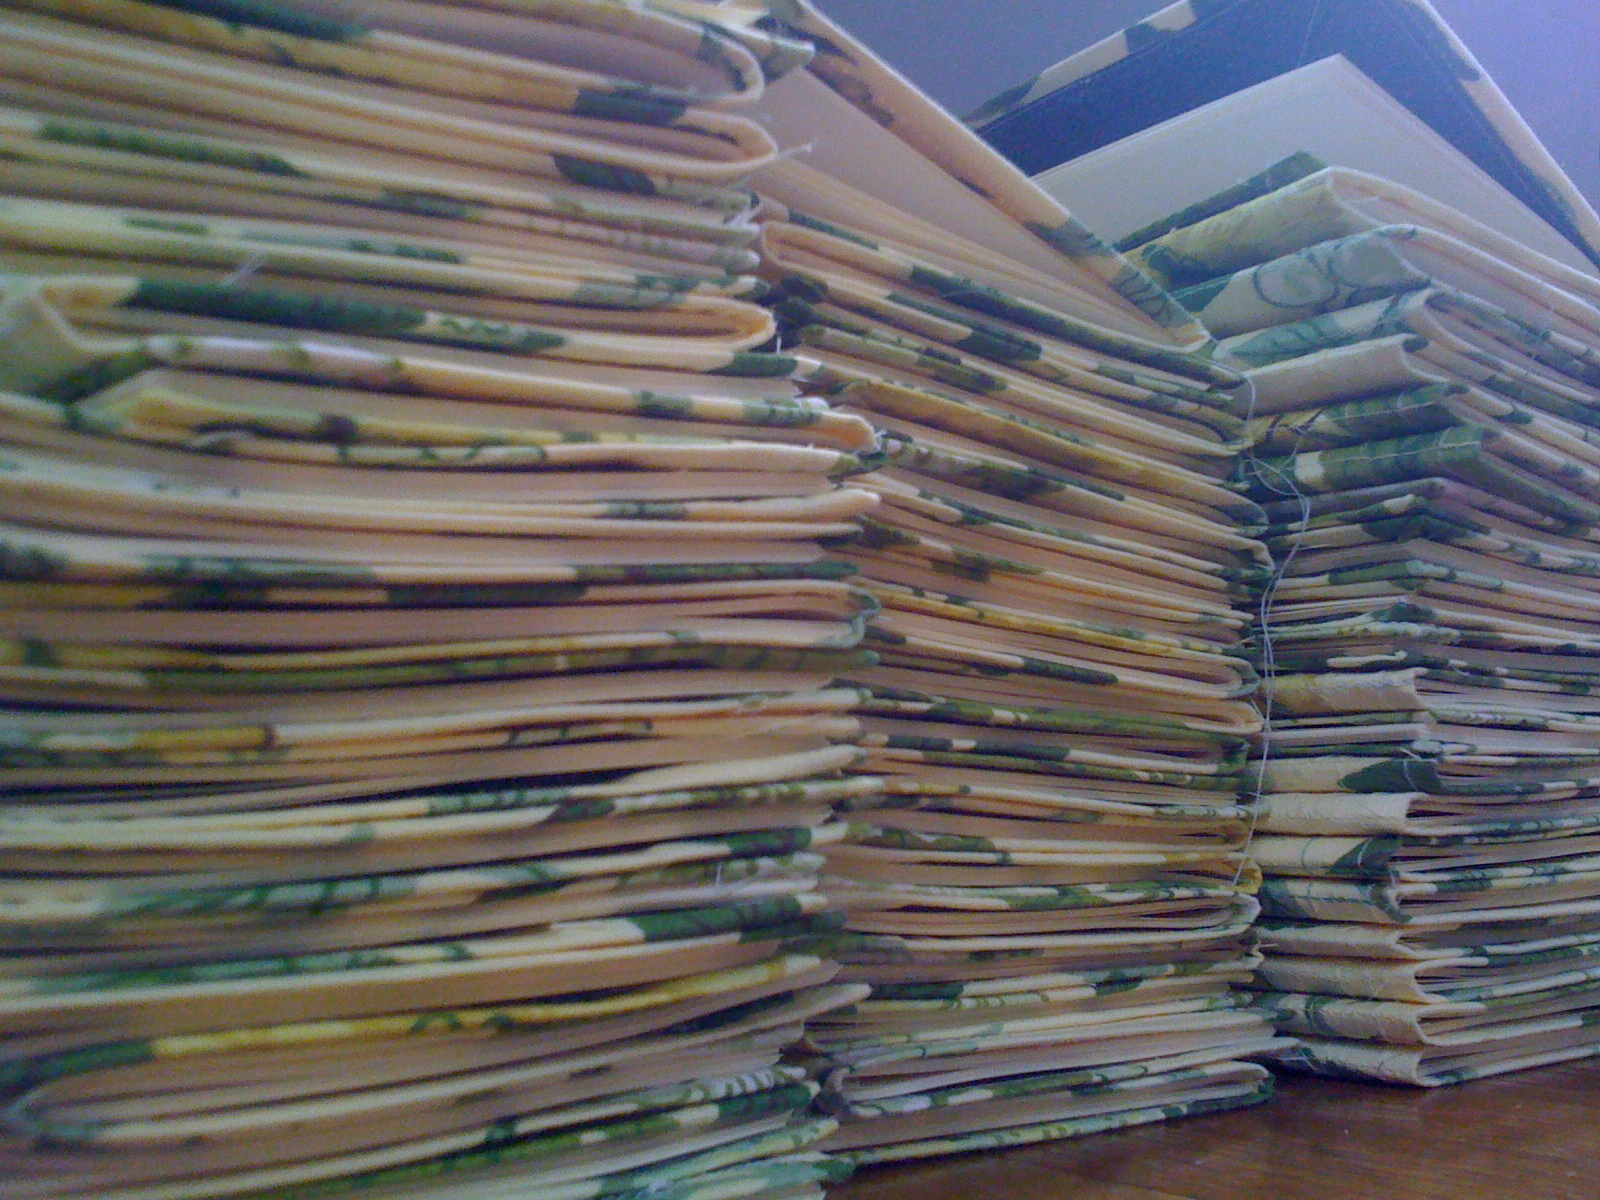 This is roughly half of the 90 books I made for the Dusie Kollective this year